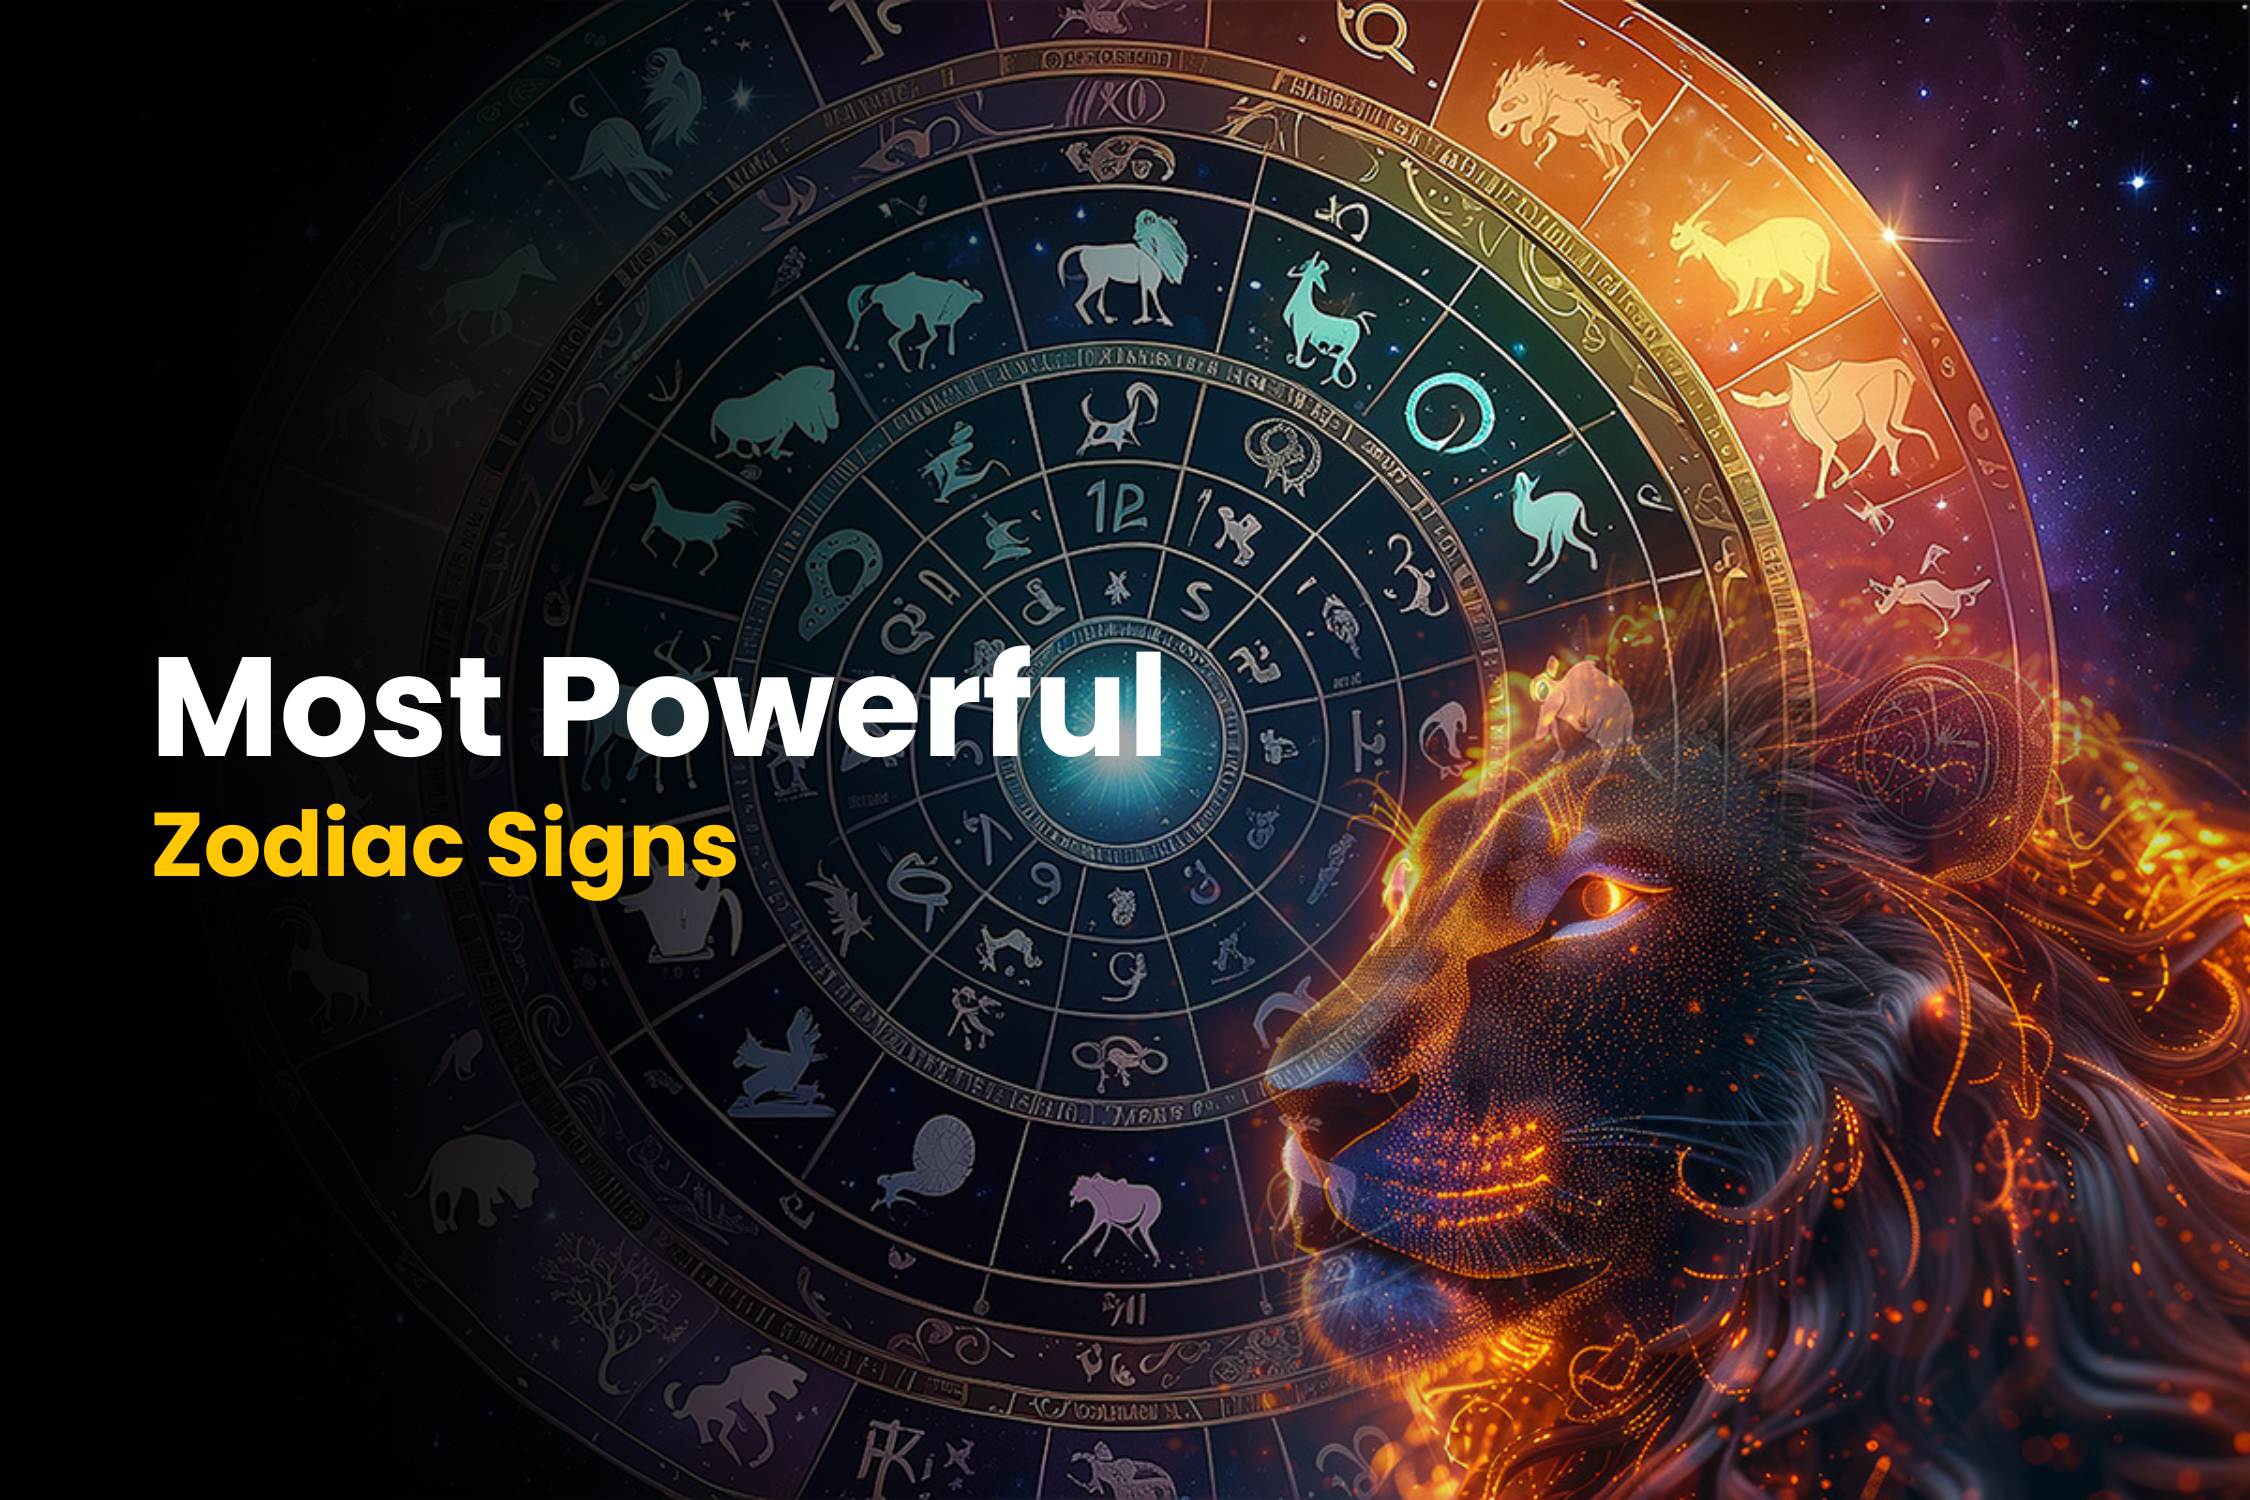 Why Are Fixed Zodiac Signs The Most Powerful In Astrology